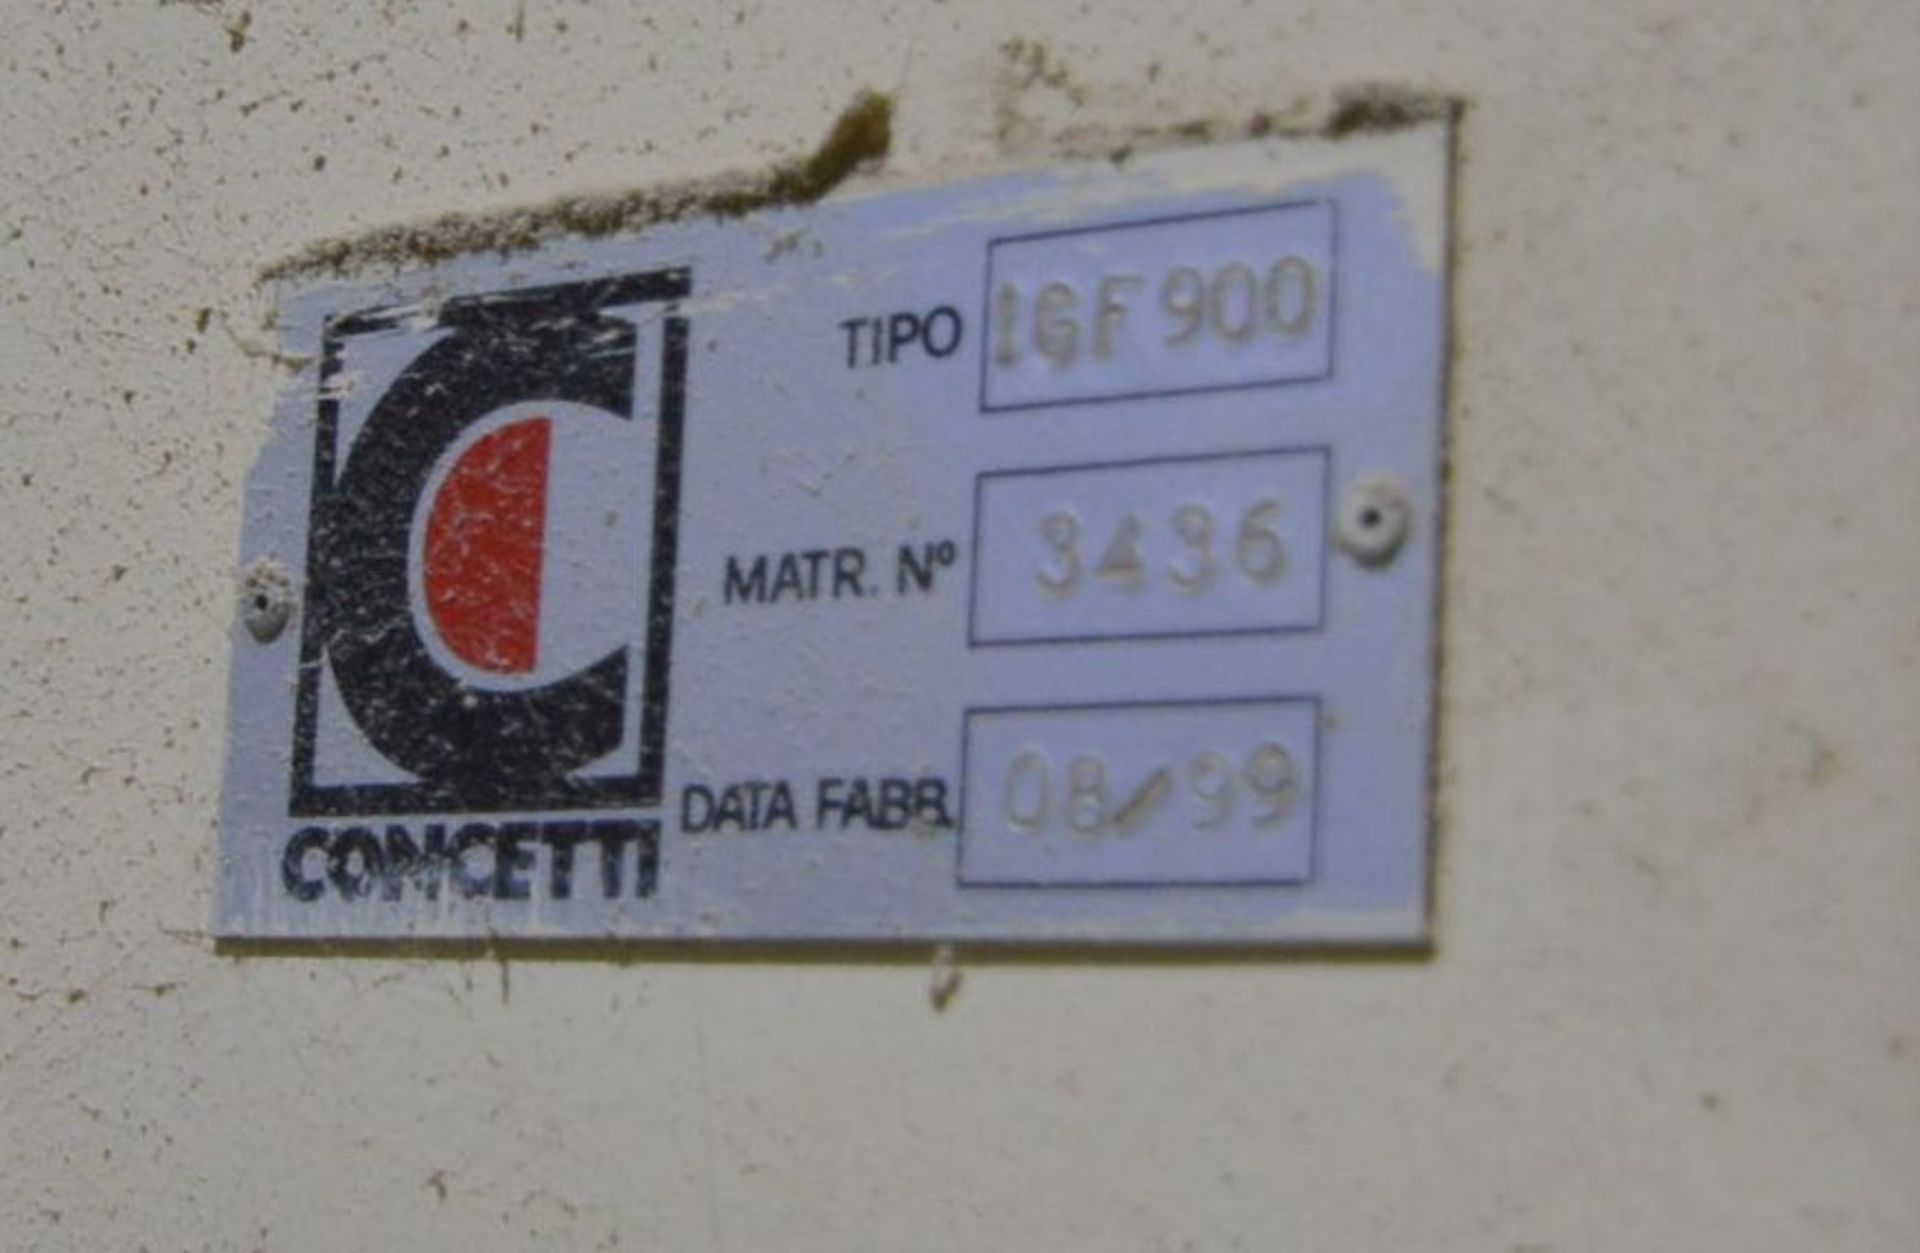 Concetti IGF900 SACK PACKING SYSTEM, serial no. 3436, year of manufacture 1999, with Concetti C.B. - Image 7 of 13